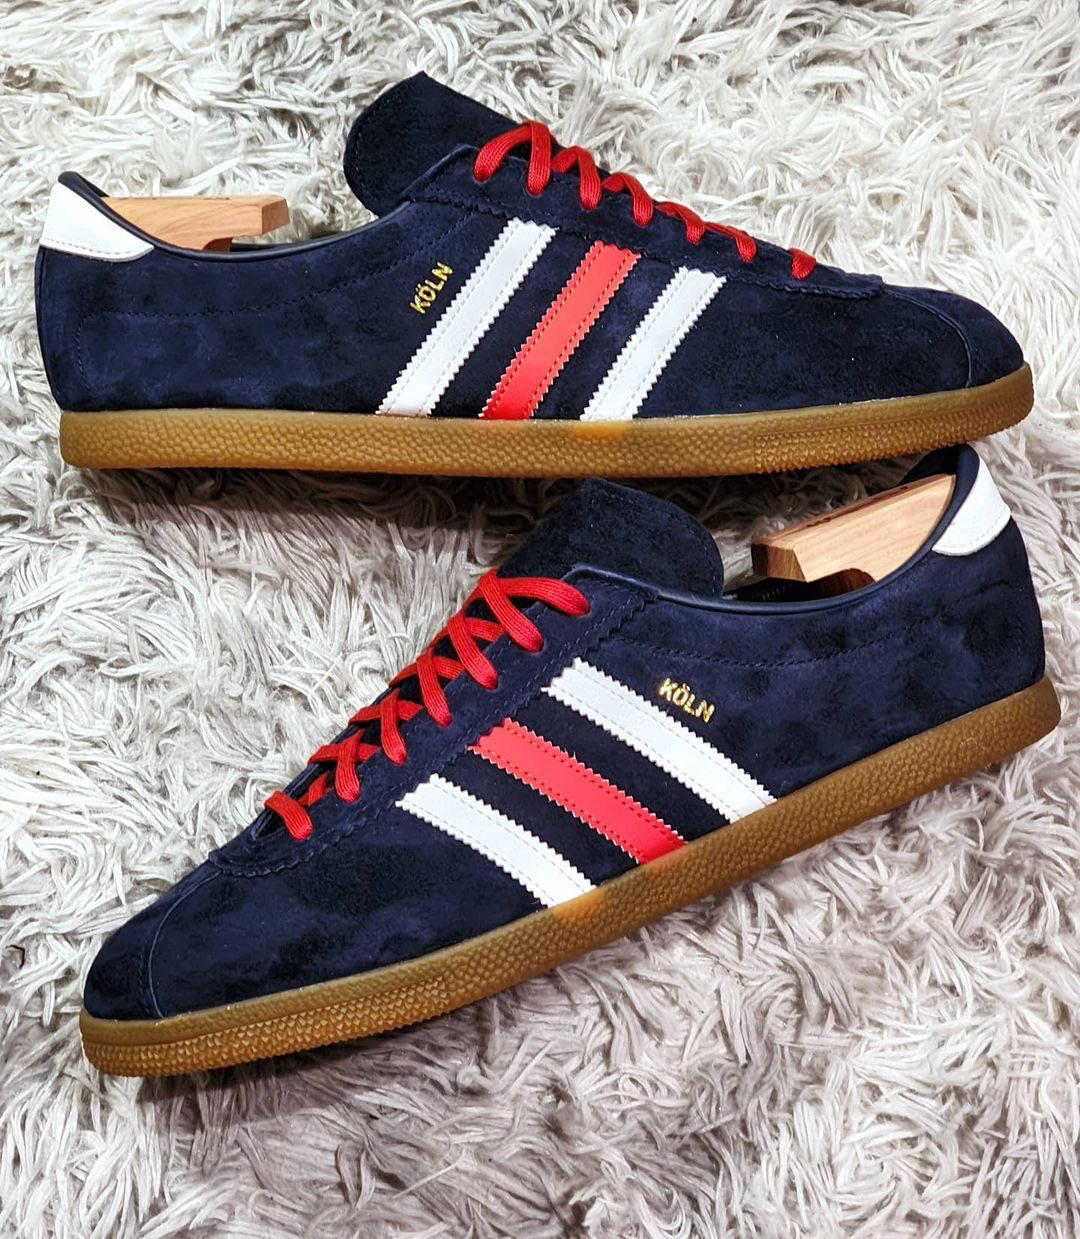 The Casuals Directory on "Adidas Koln Pic Credit: @covozzy instagram https://t.co/fur6U5dS0Q" / Twitter